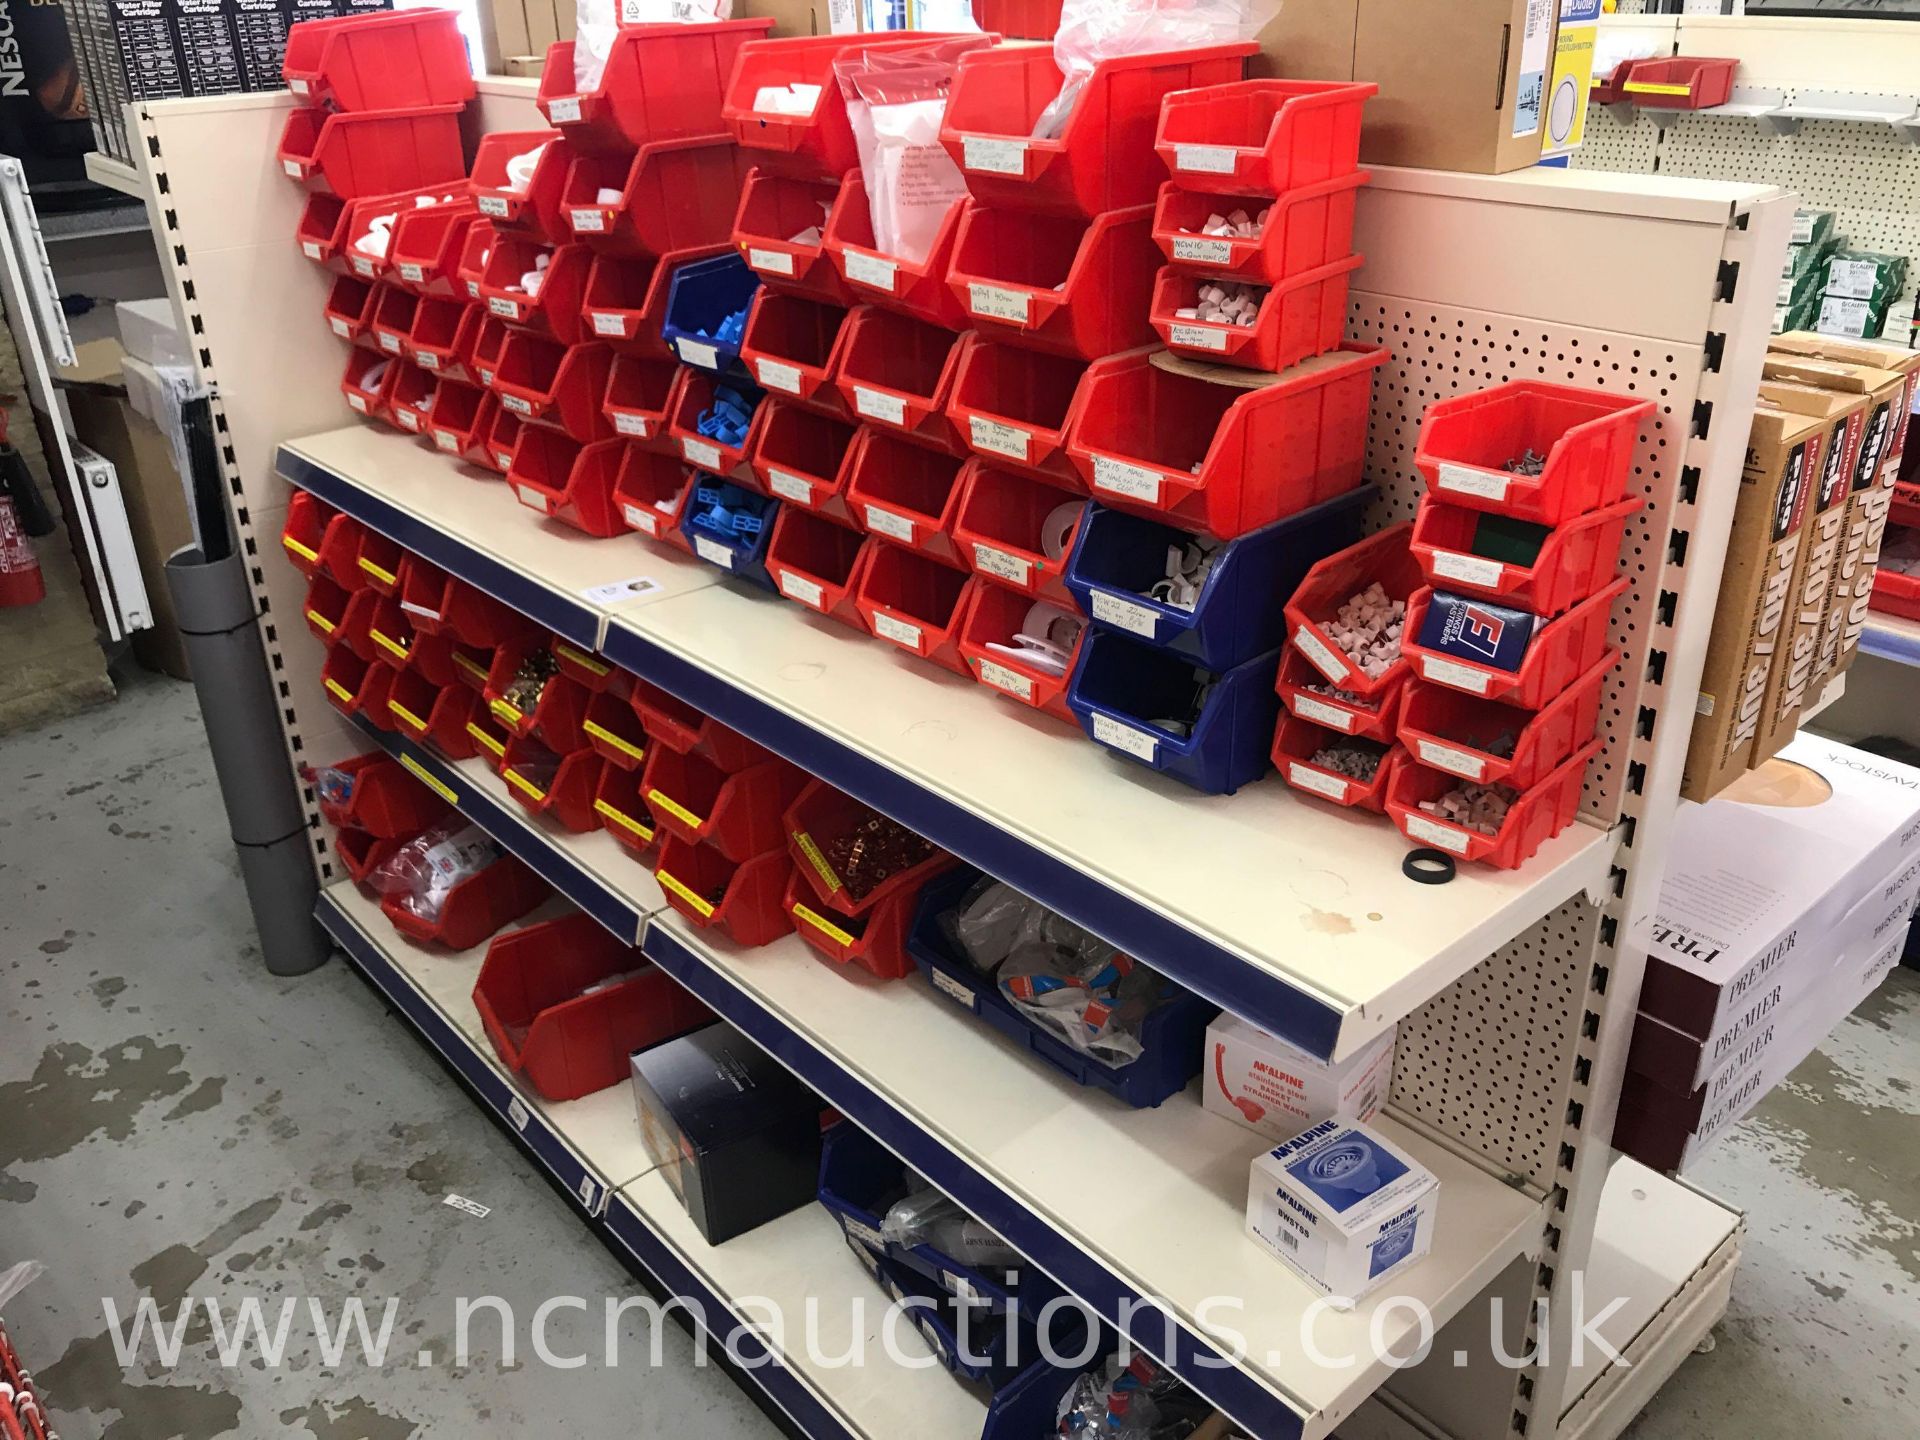 Double sided display rack with plumbing products - Image 4 of 12